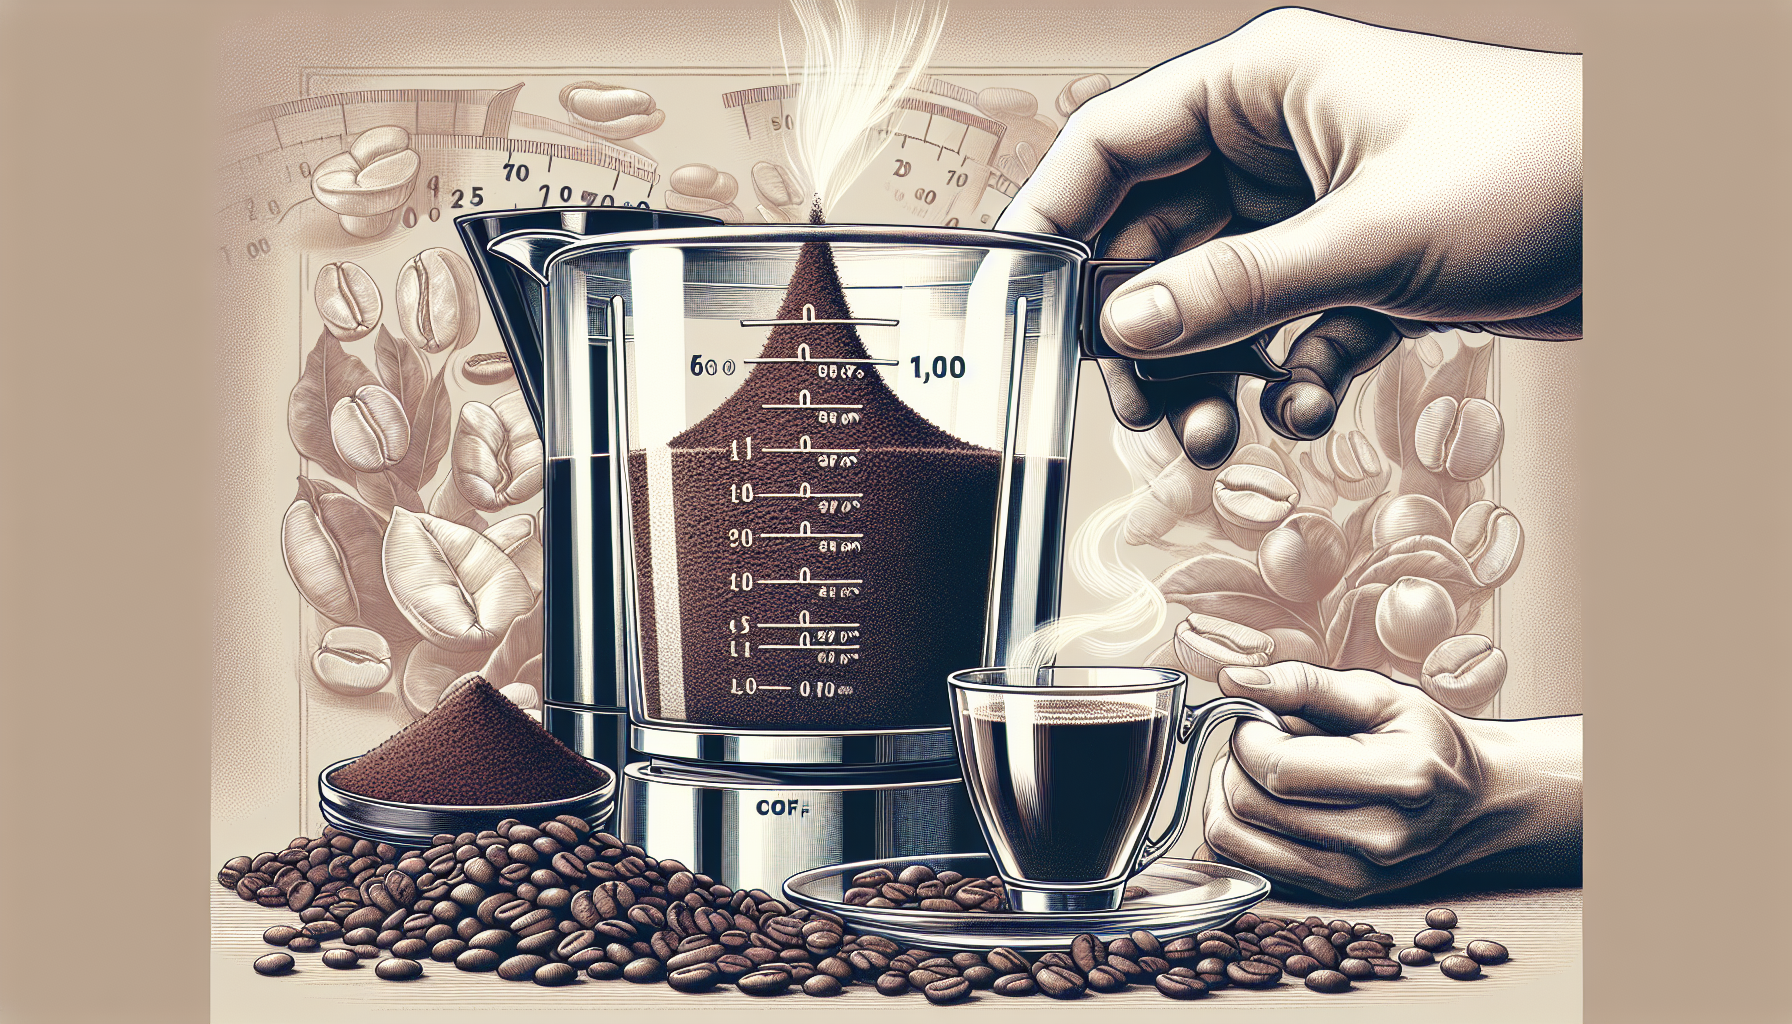 Measuring cup and coffee grounds for precision measuring